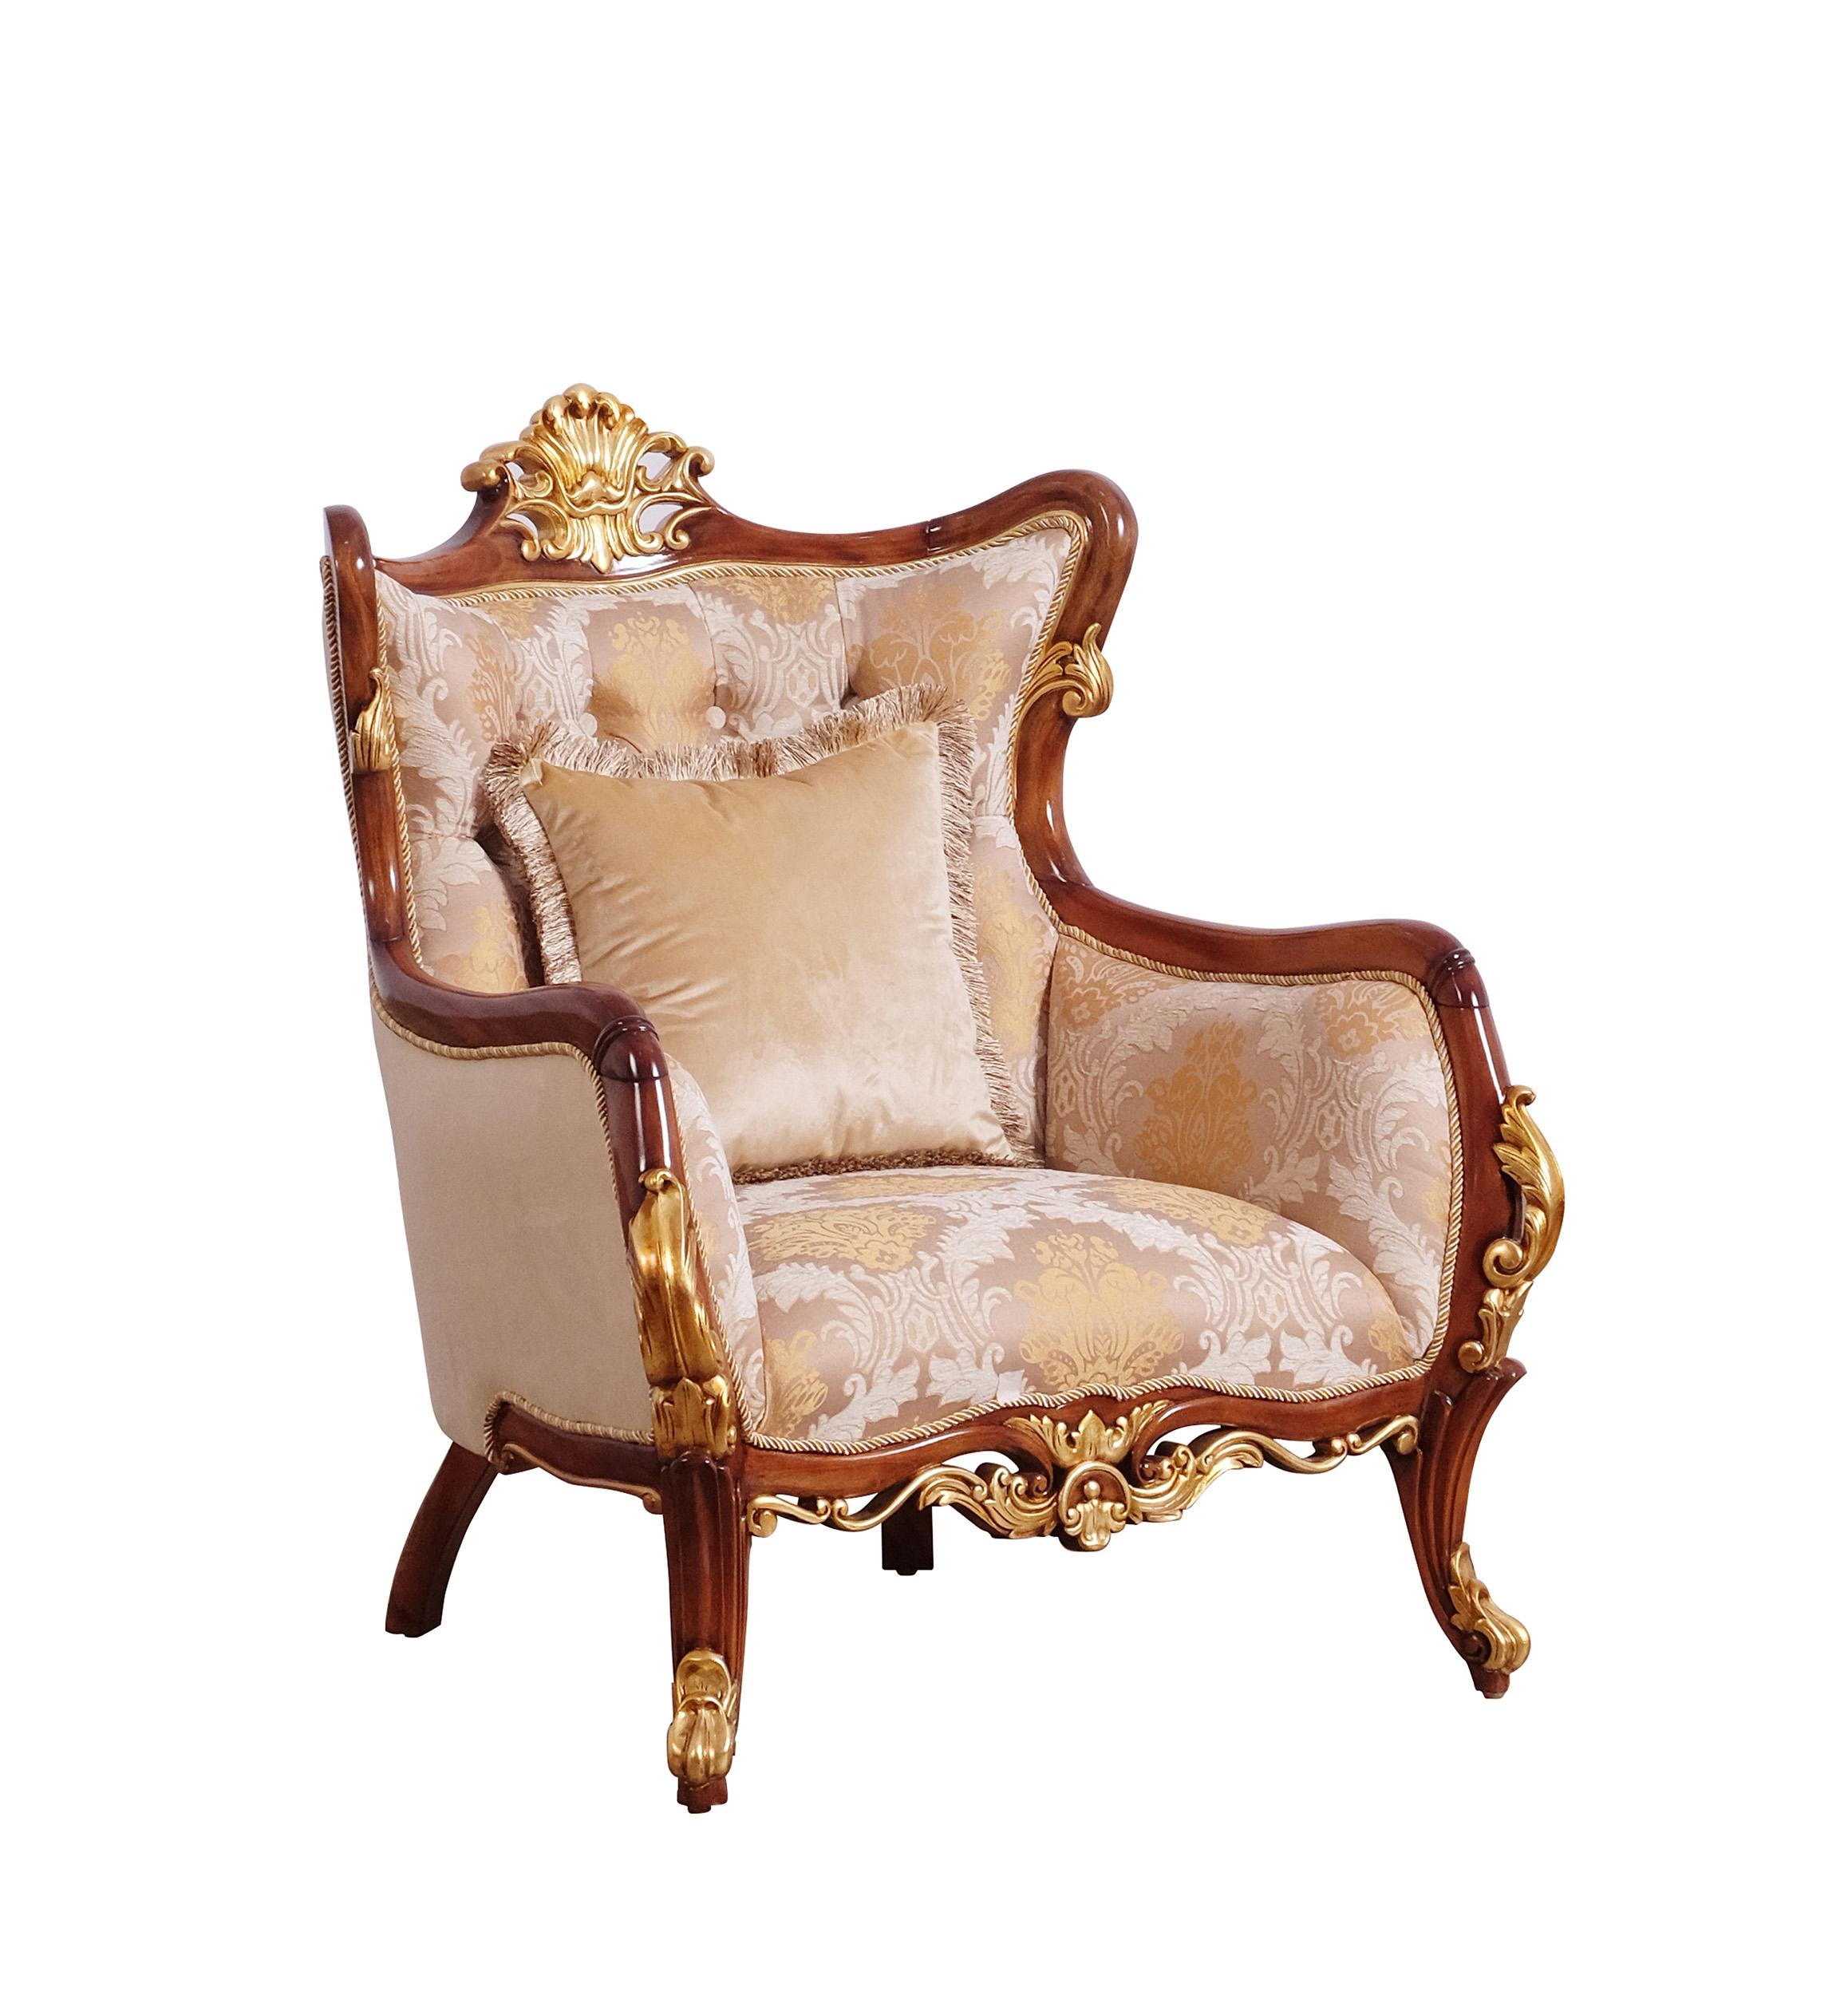 Classic, Traditional Arm Chair VERONICA II 47078-C in Antique, Walnut, Gold Fabric